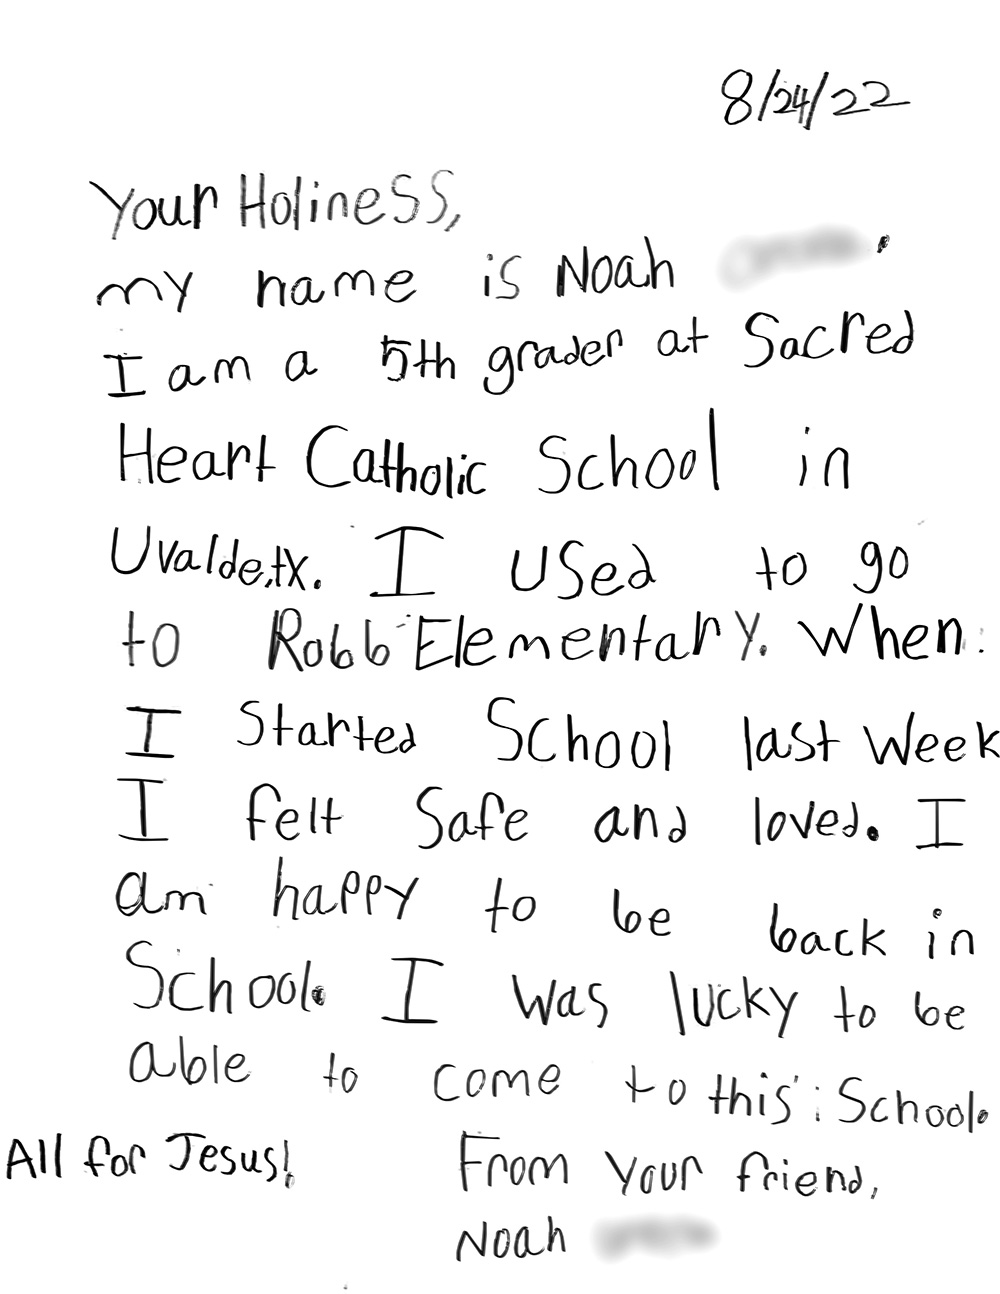 Letters from Robb Elementary students who wrote to Pope Francis (Courtesy of Catholic Extension/Juan Guajardo)